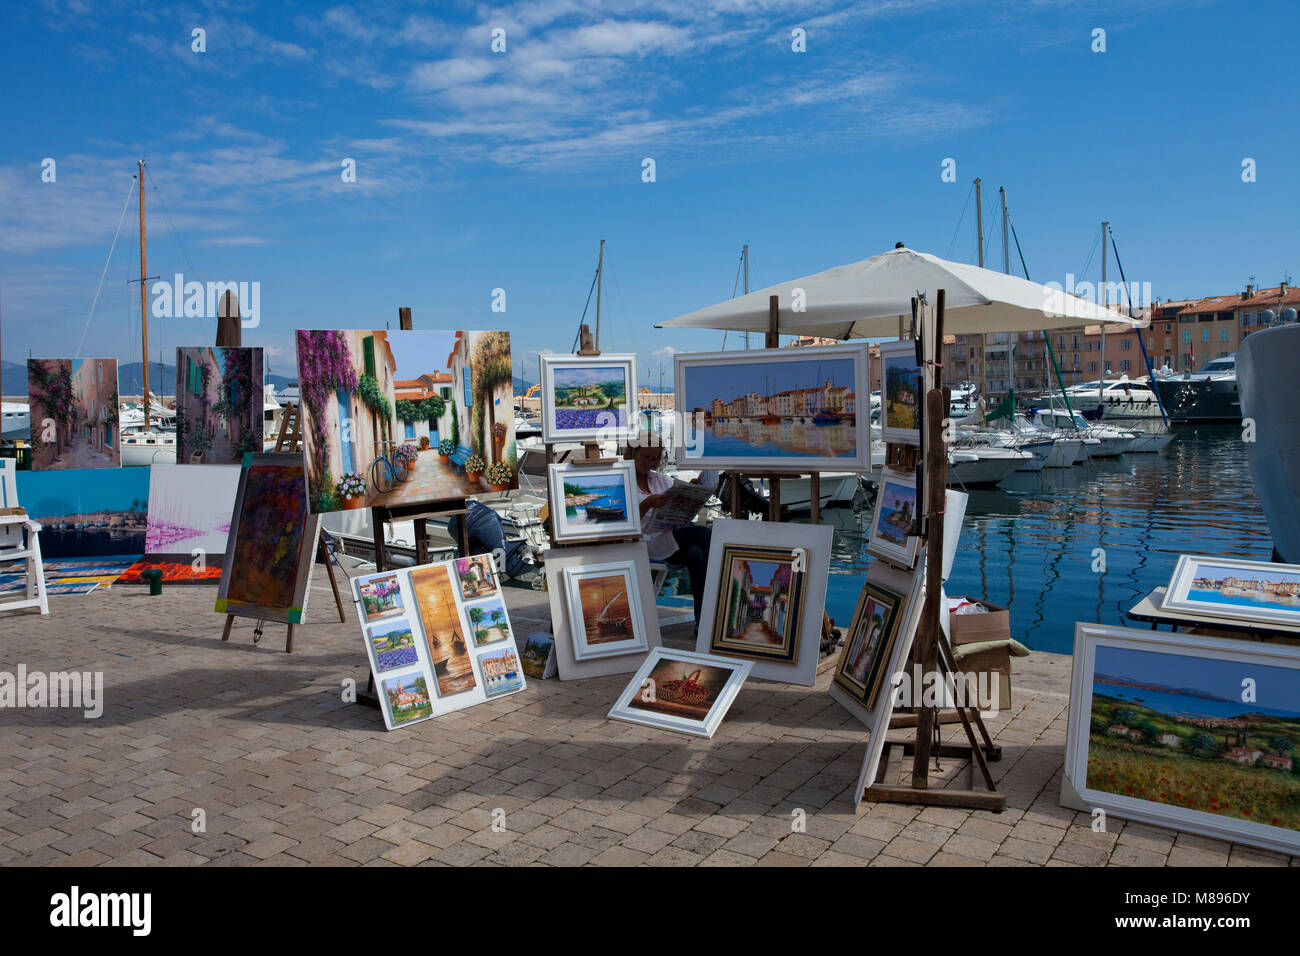 Paintings at strolling promenade at harbour of Saint-Tropez, french riviera, South France, Cote d'Azur, France, Europe Stock Photo